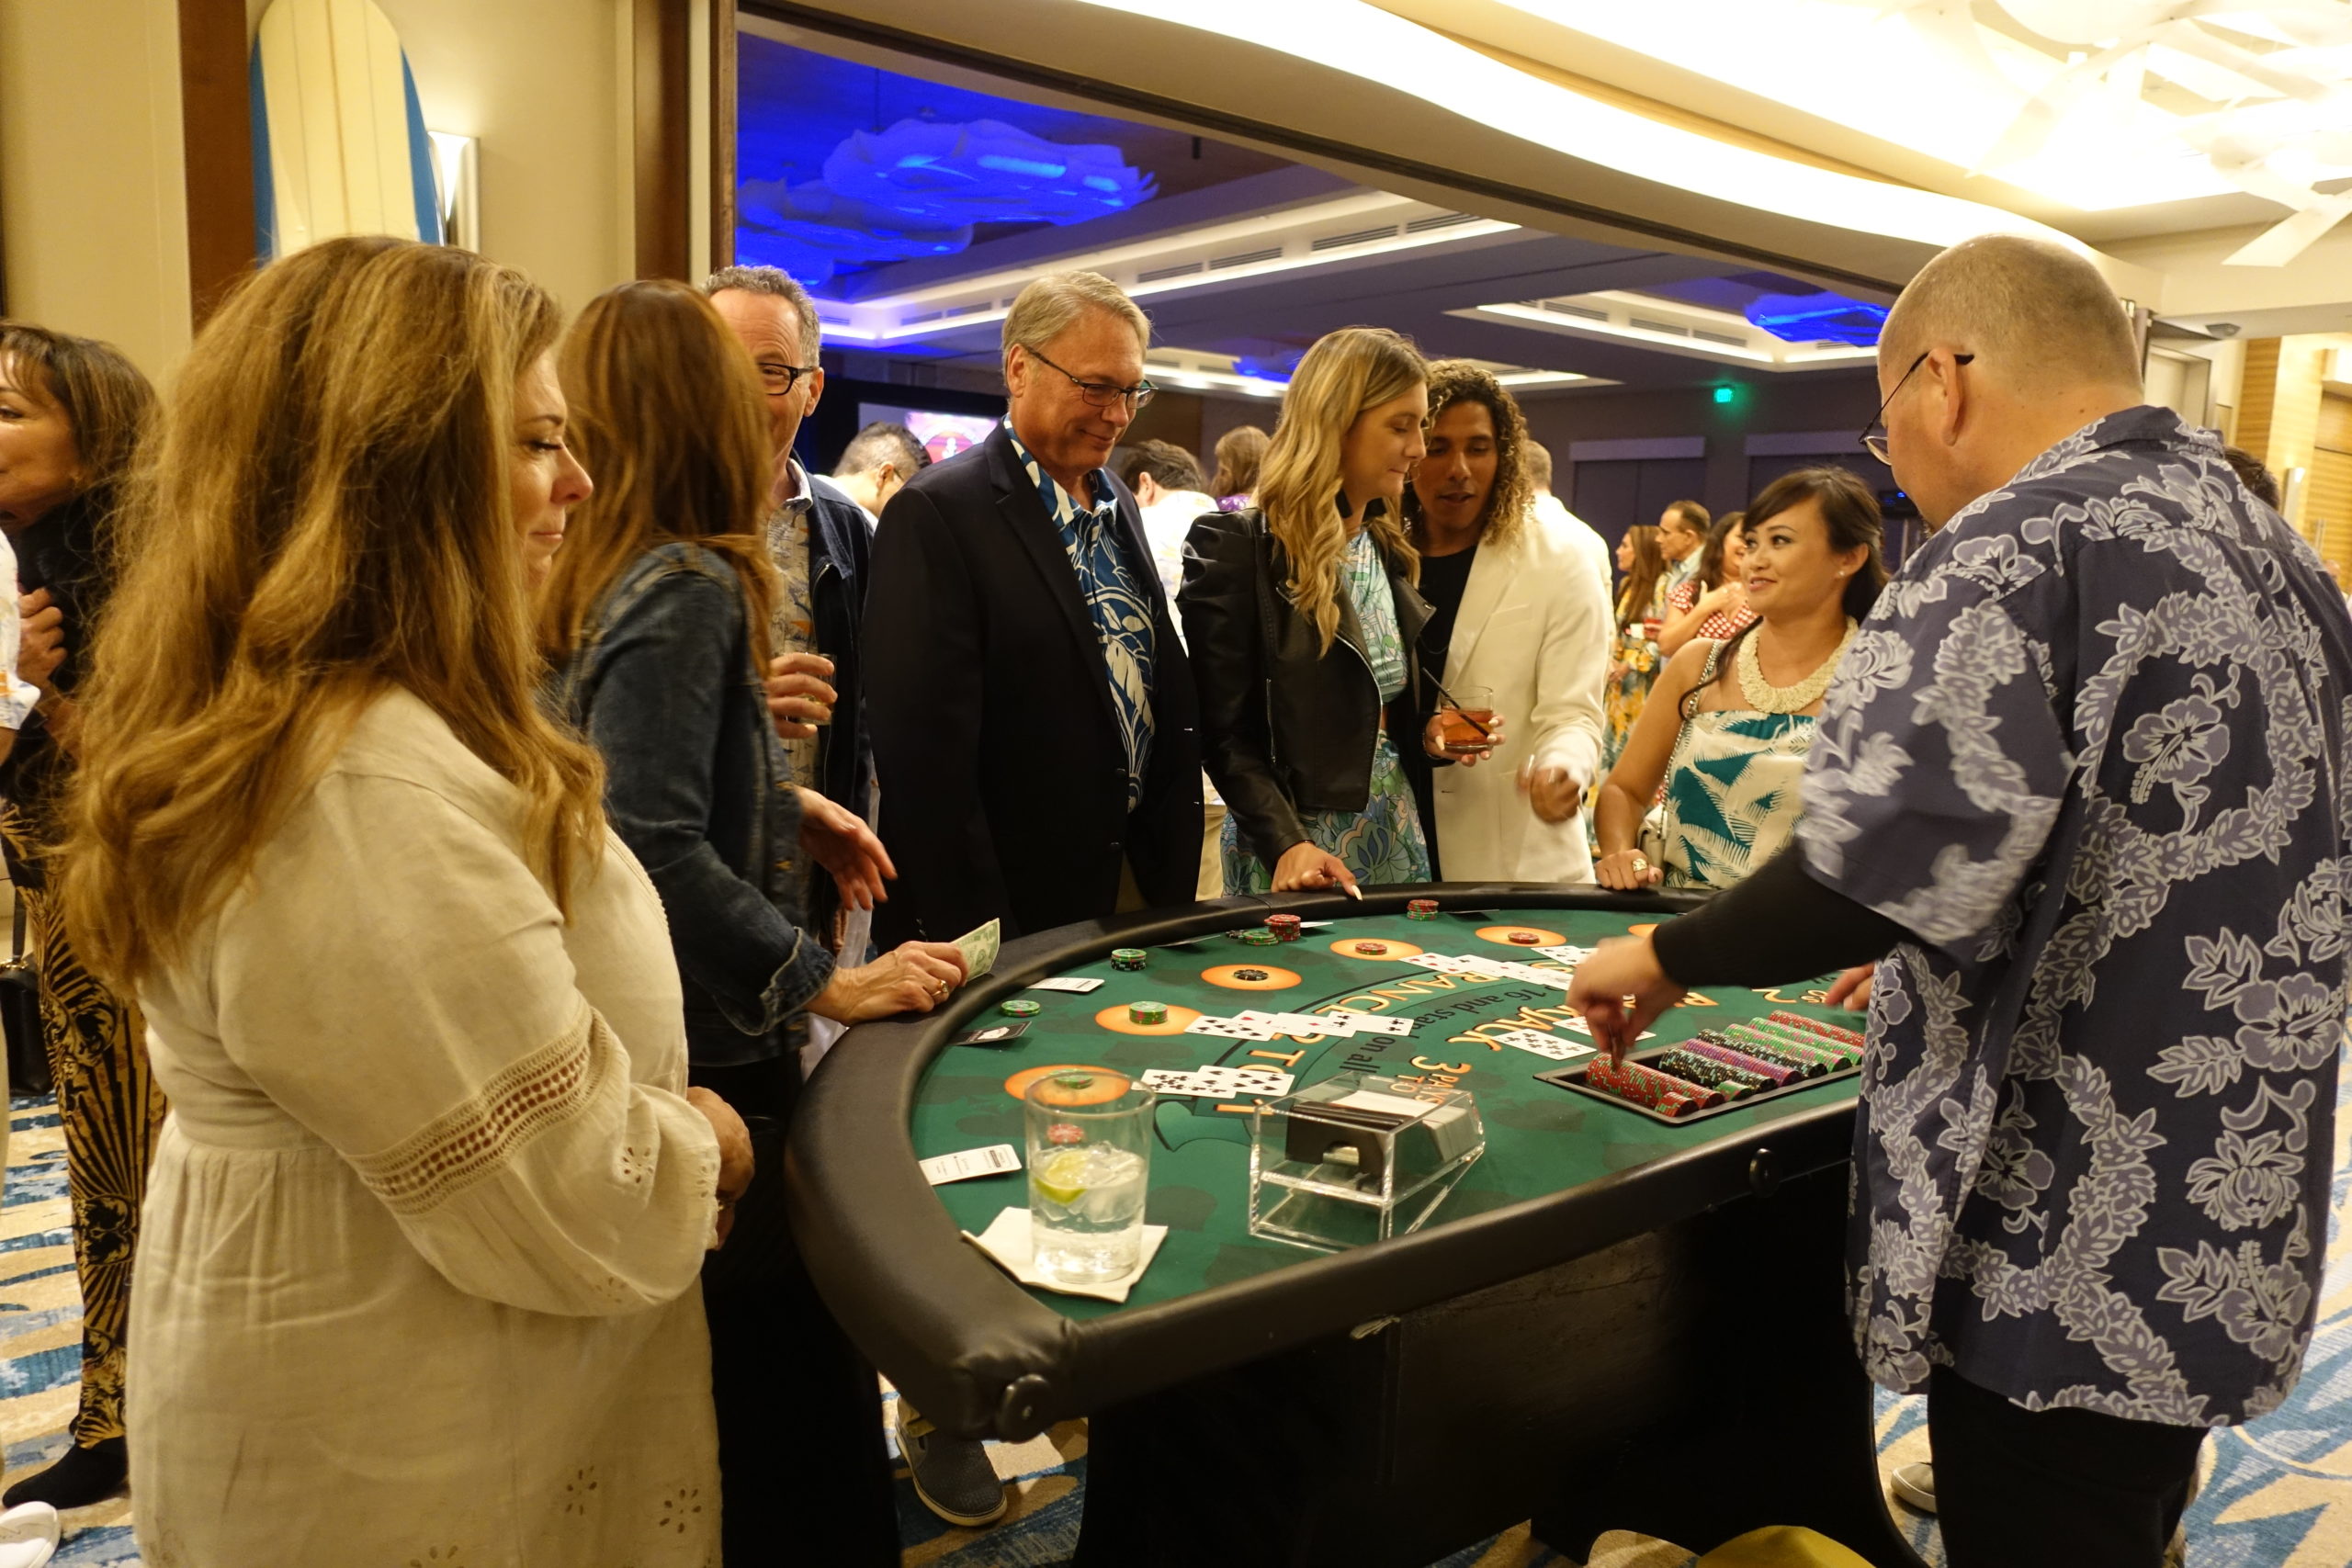 A Full Blackjack Table At A Casino-themed Event